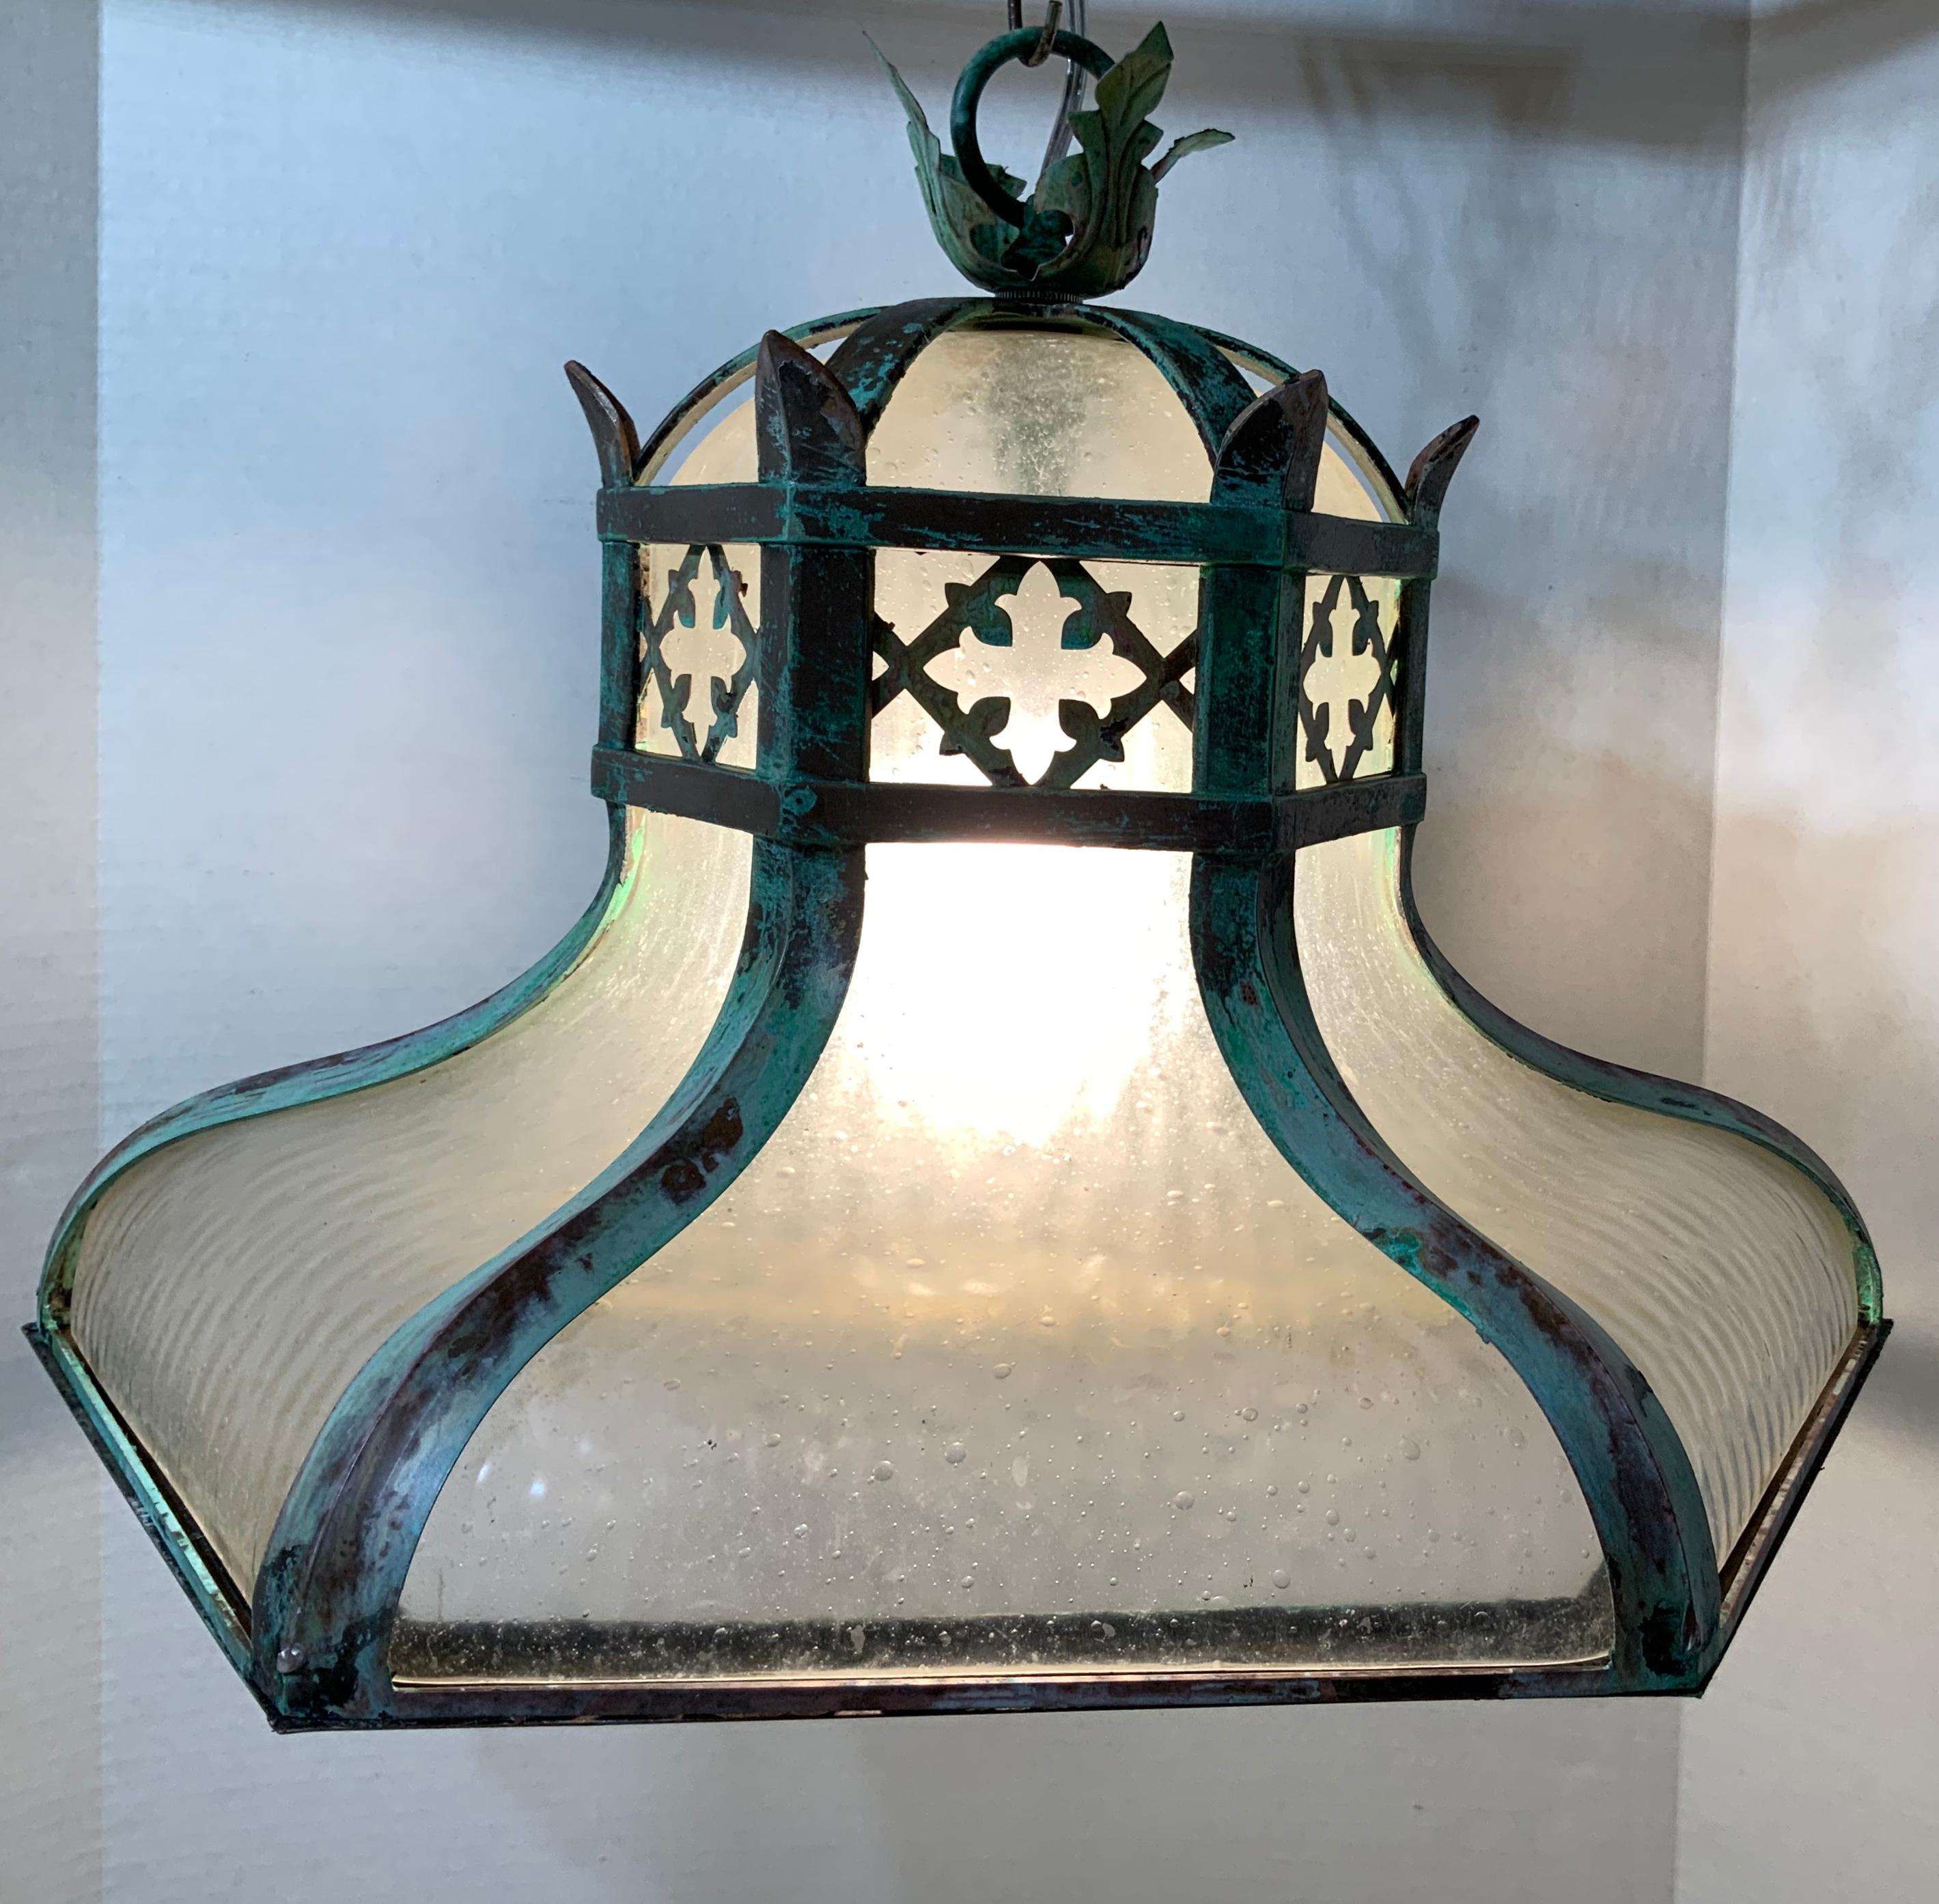 Elegant antique chandelier made of solid brass with blown glass inner. Exceptional style of crown look with beautiful oxidized greenish patina. Newly rewired with one-light, look at capacity of the light in the photos.
Great decorative light.